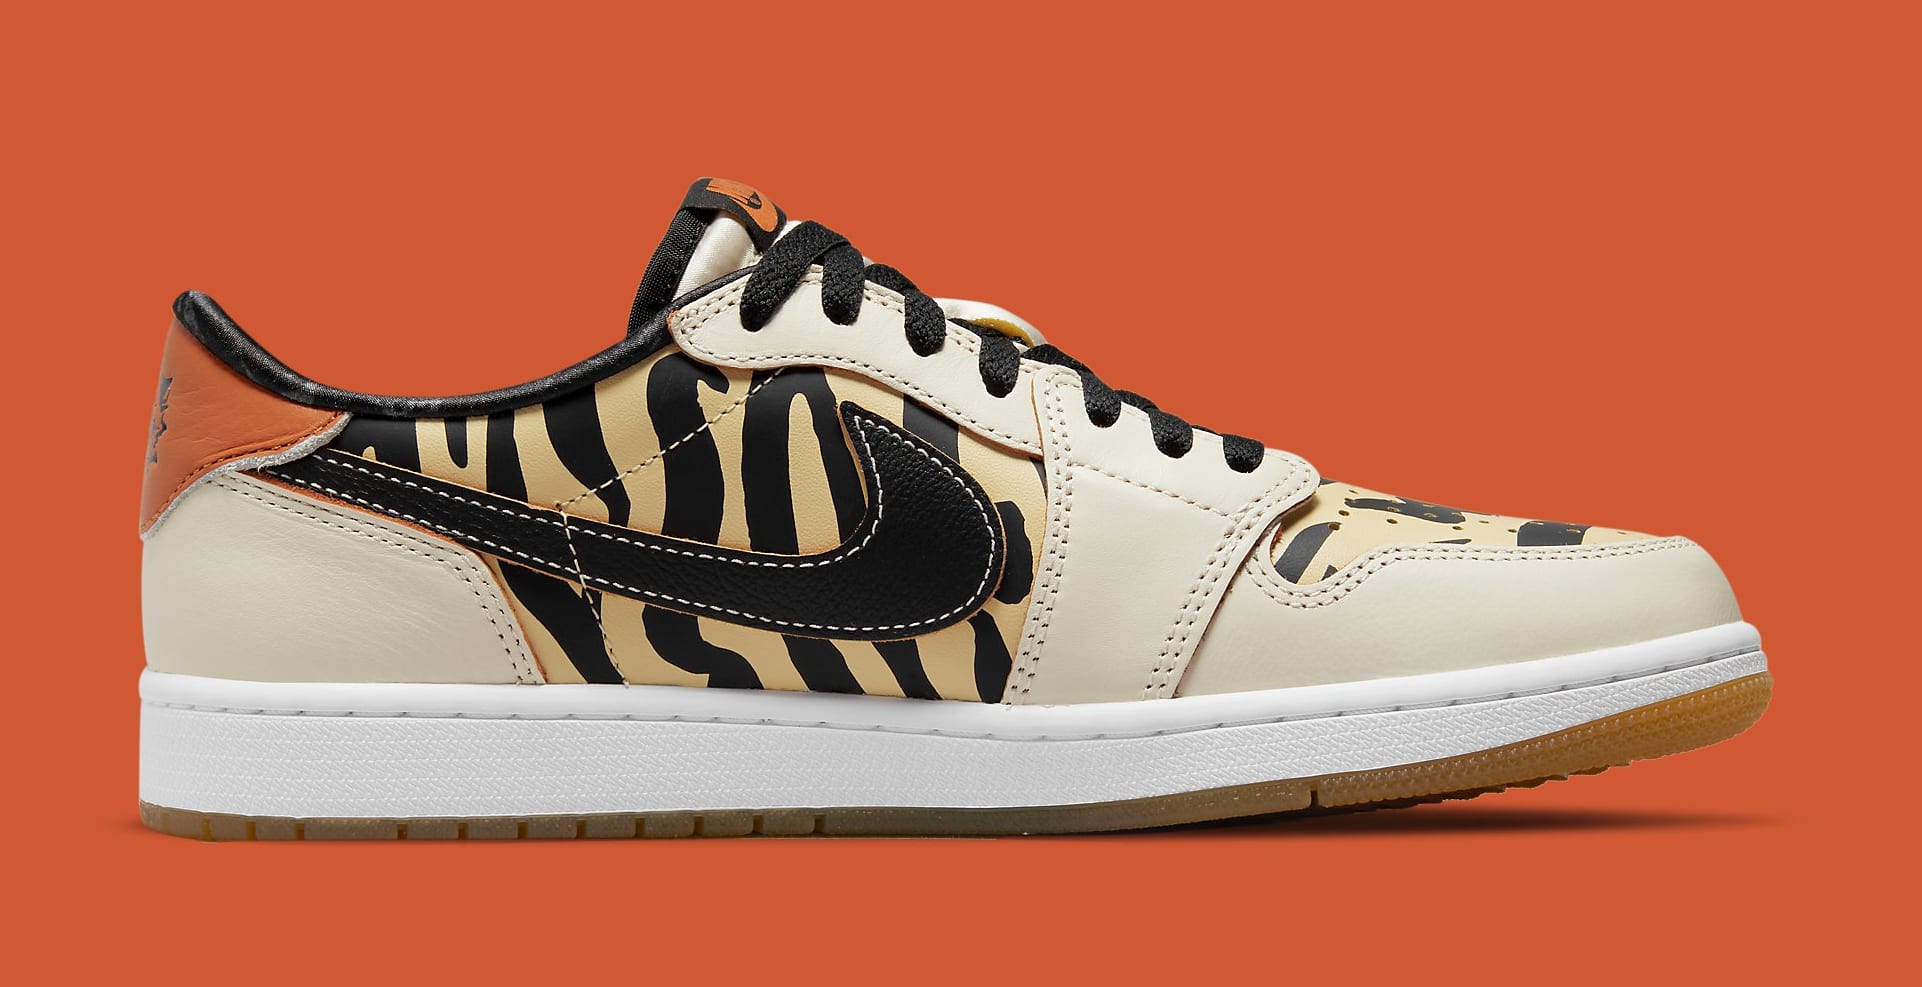 Air Jordan 1 Low 'Year of the Tiger' Release Date DH6932-100 